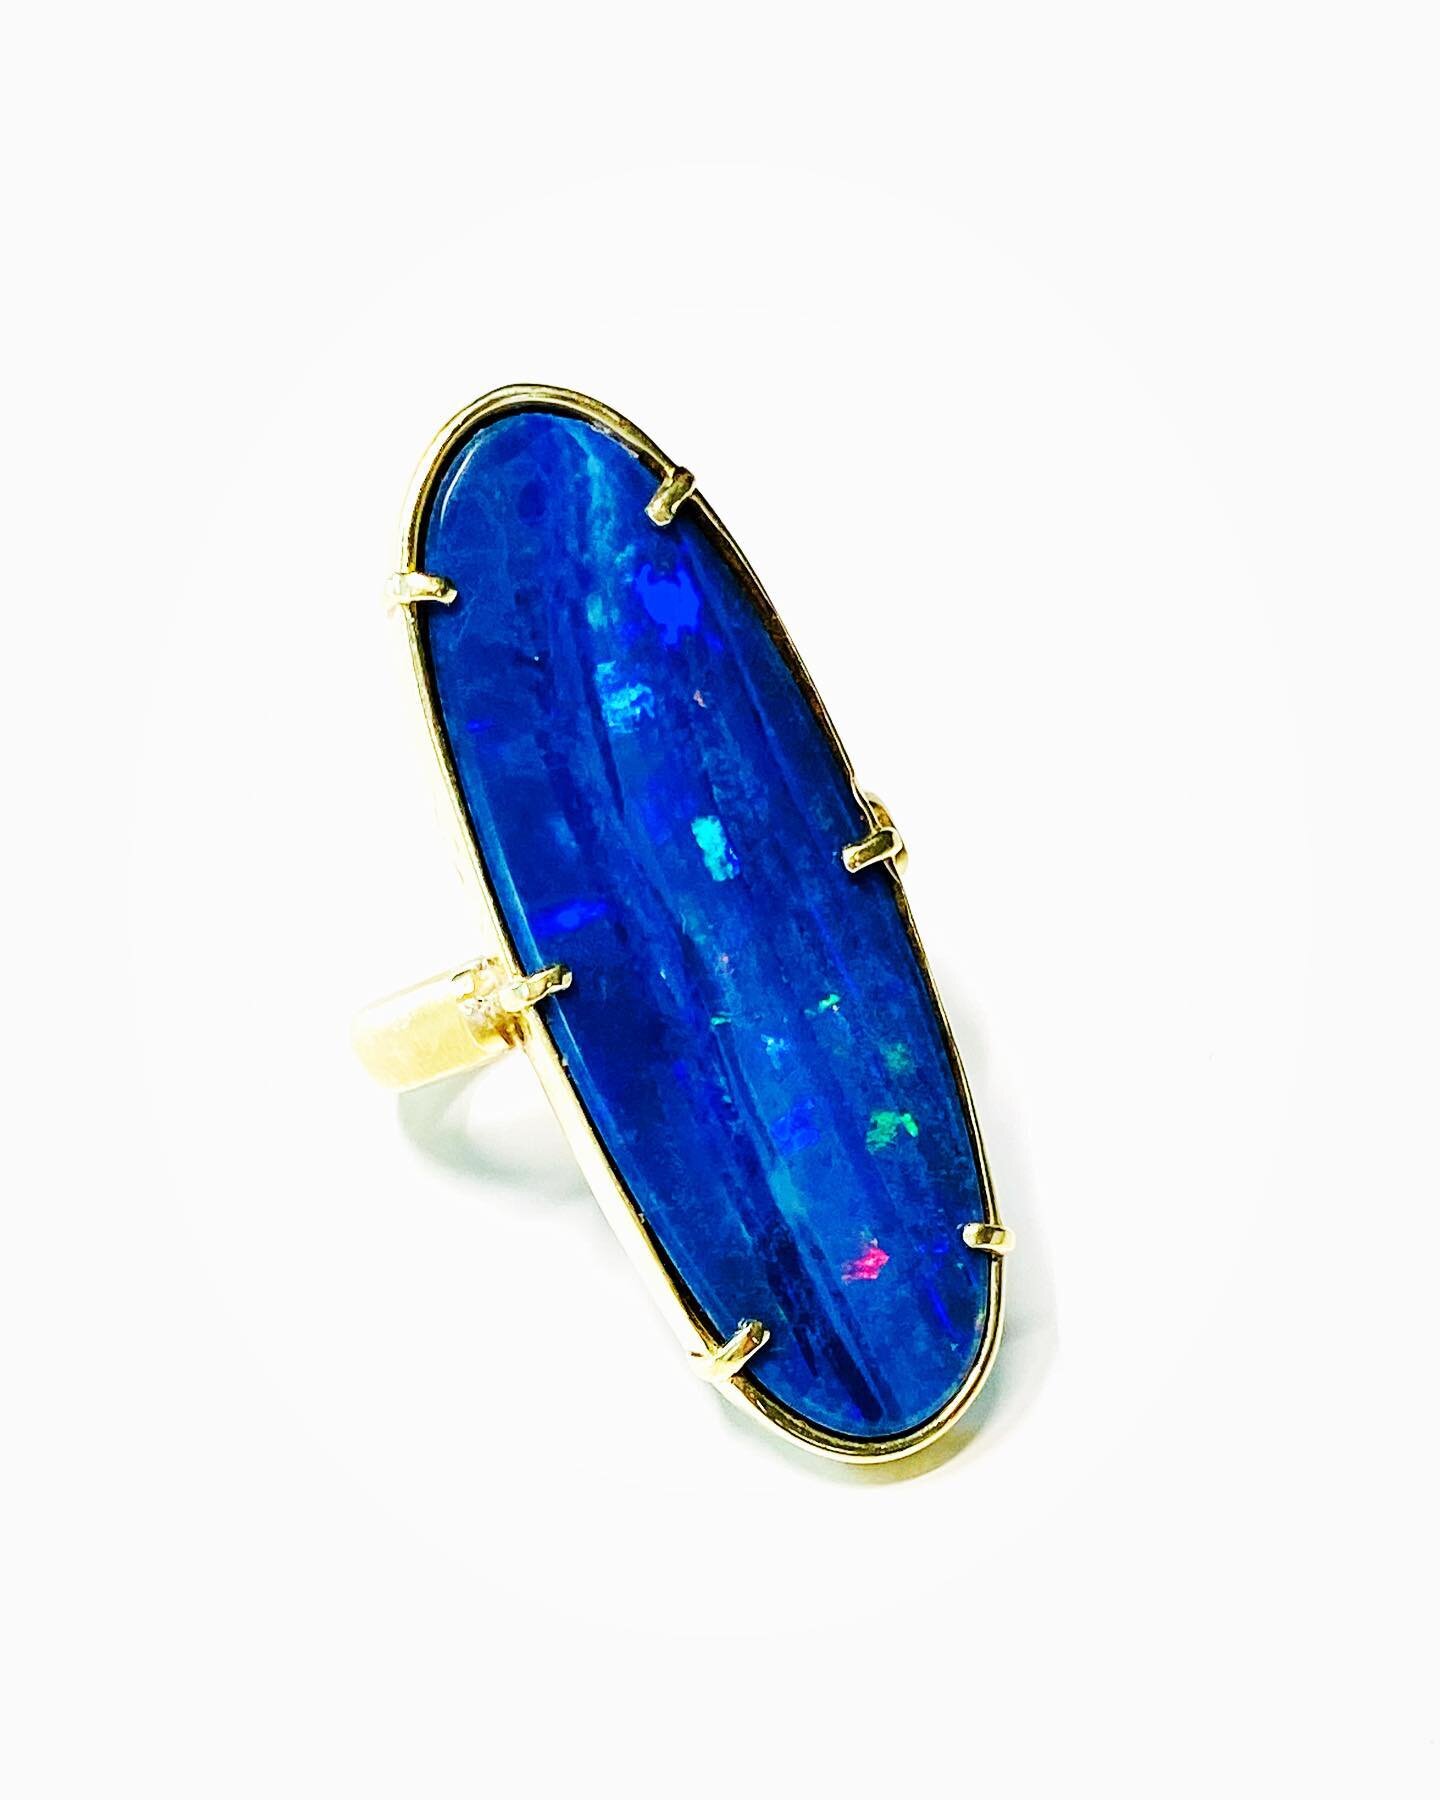 This dreamy eighteen karat yellow gold ring is prong set with an long oval blue opal doublet displaying spectral colors. Available to own now!
.
.
.
.
#theresecrowedesignltd #customjewelry #jewelrydesigner #opaldoublet #ring #neverenoughrings #jewelr